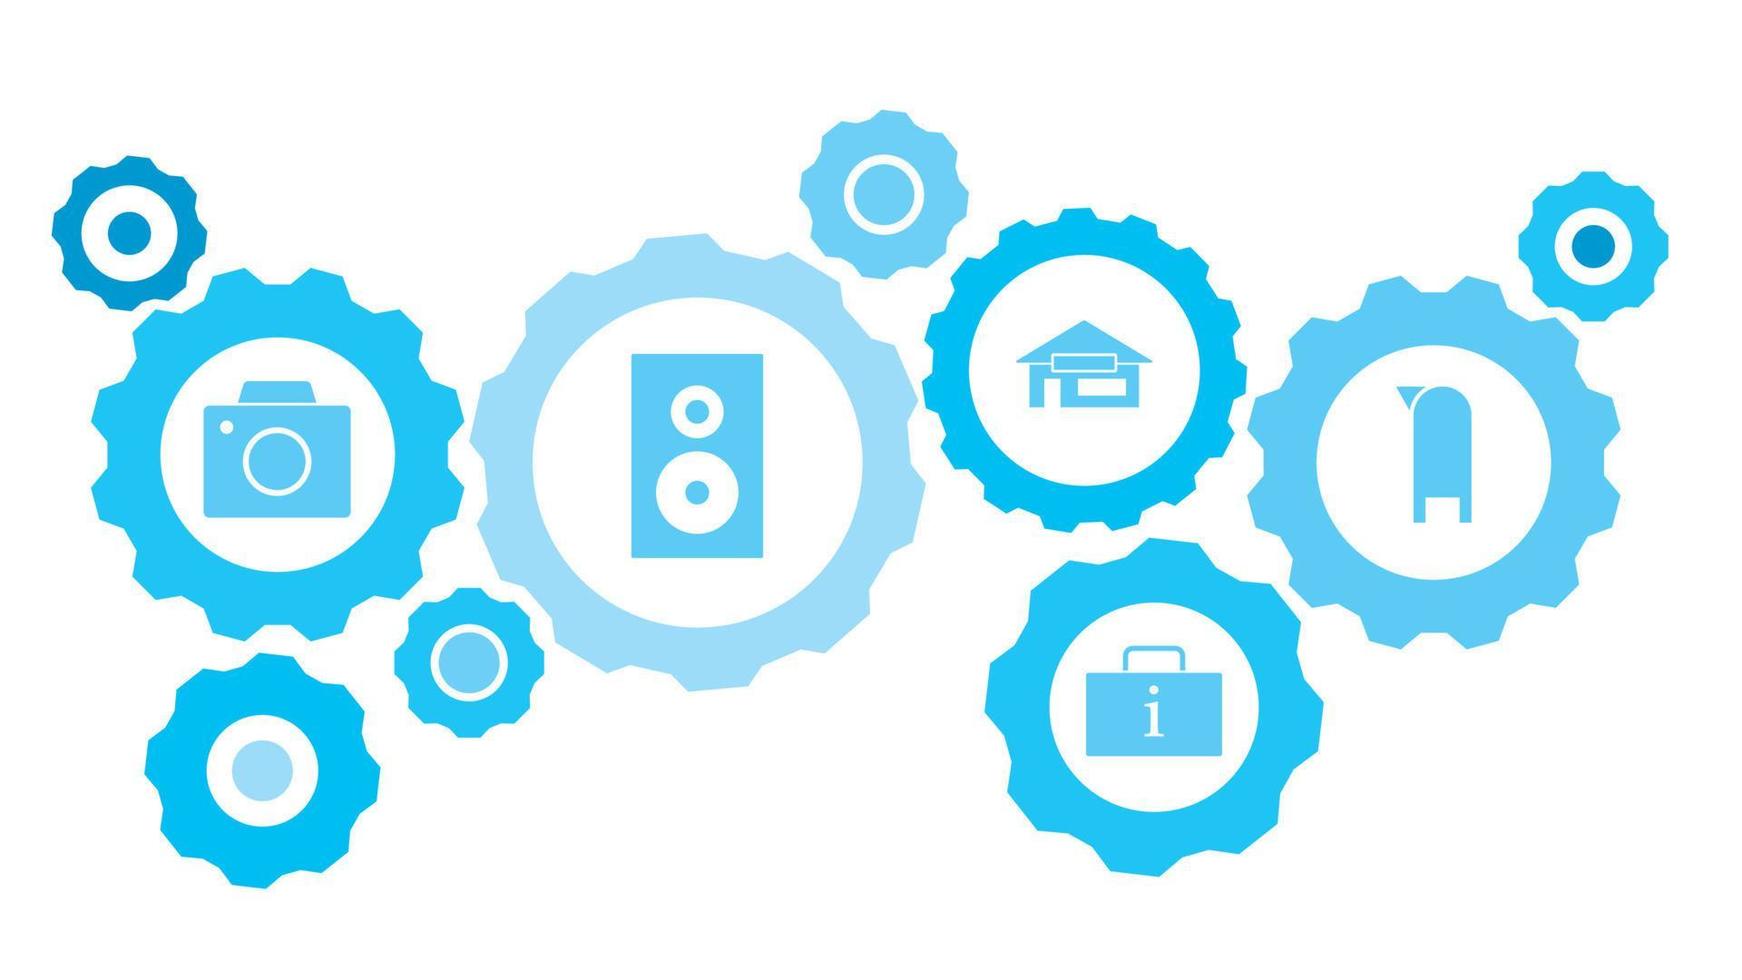 Mailbox gear blue icon set. Abstract background with connected gears and icons for logistic, service, shipping, distribution, transport, market, communicate concepts vector